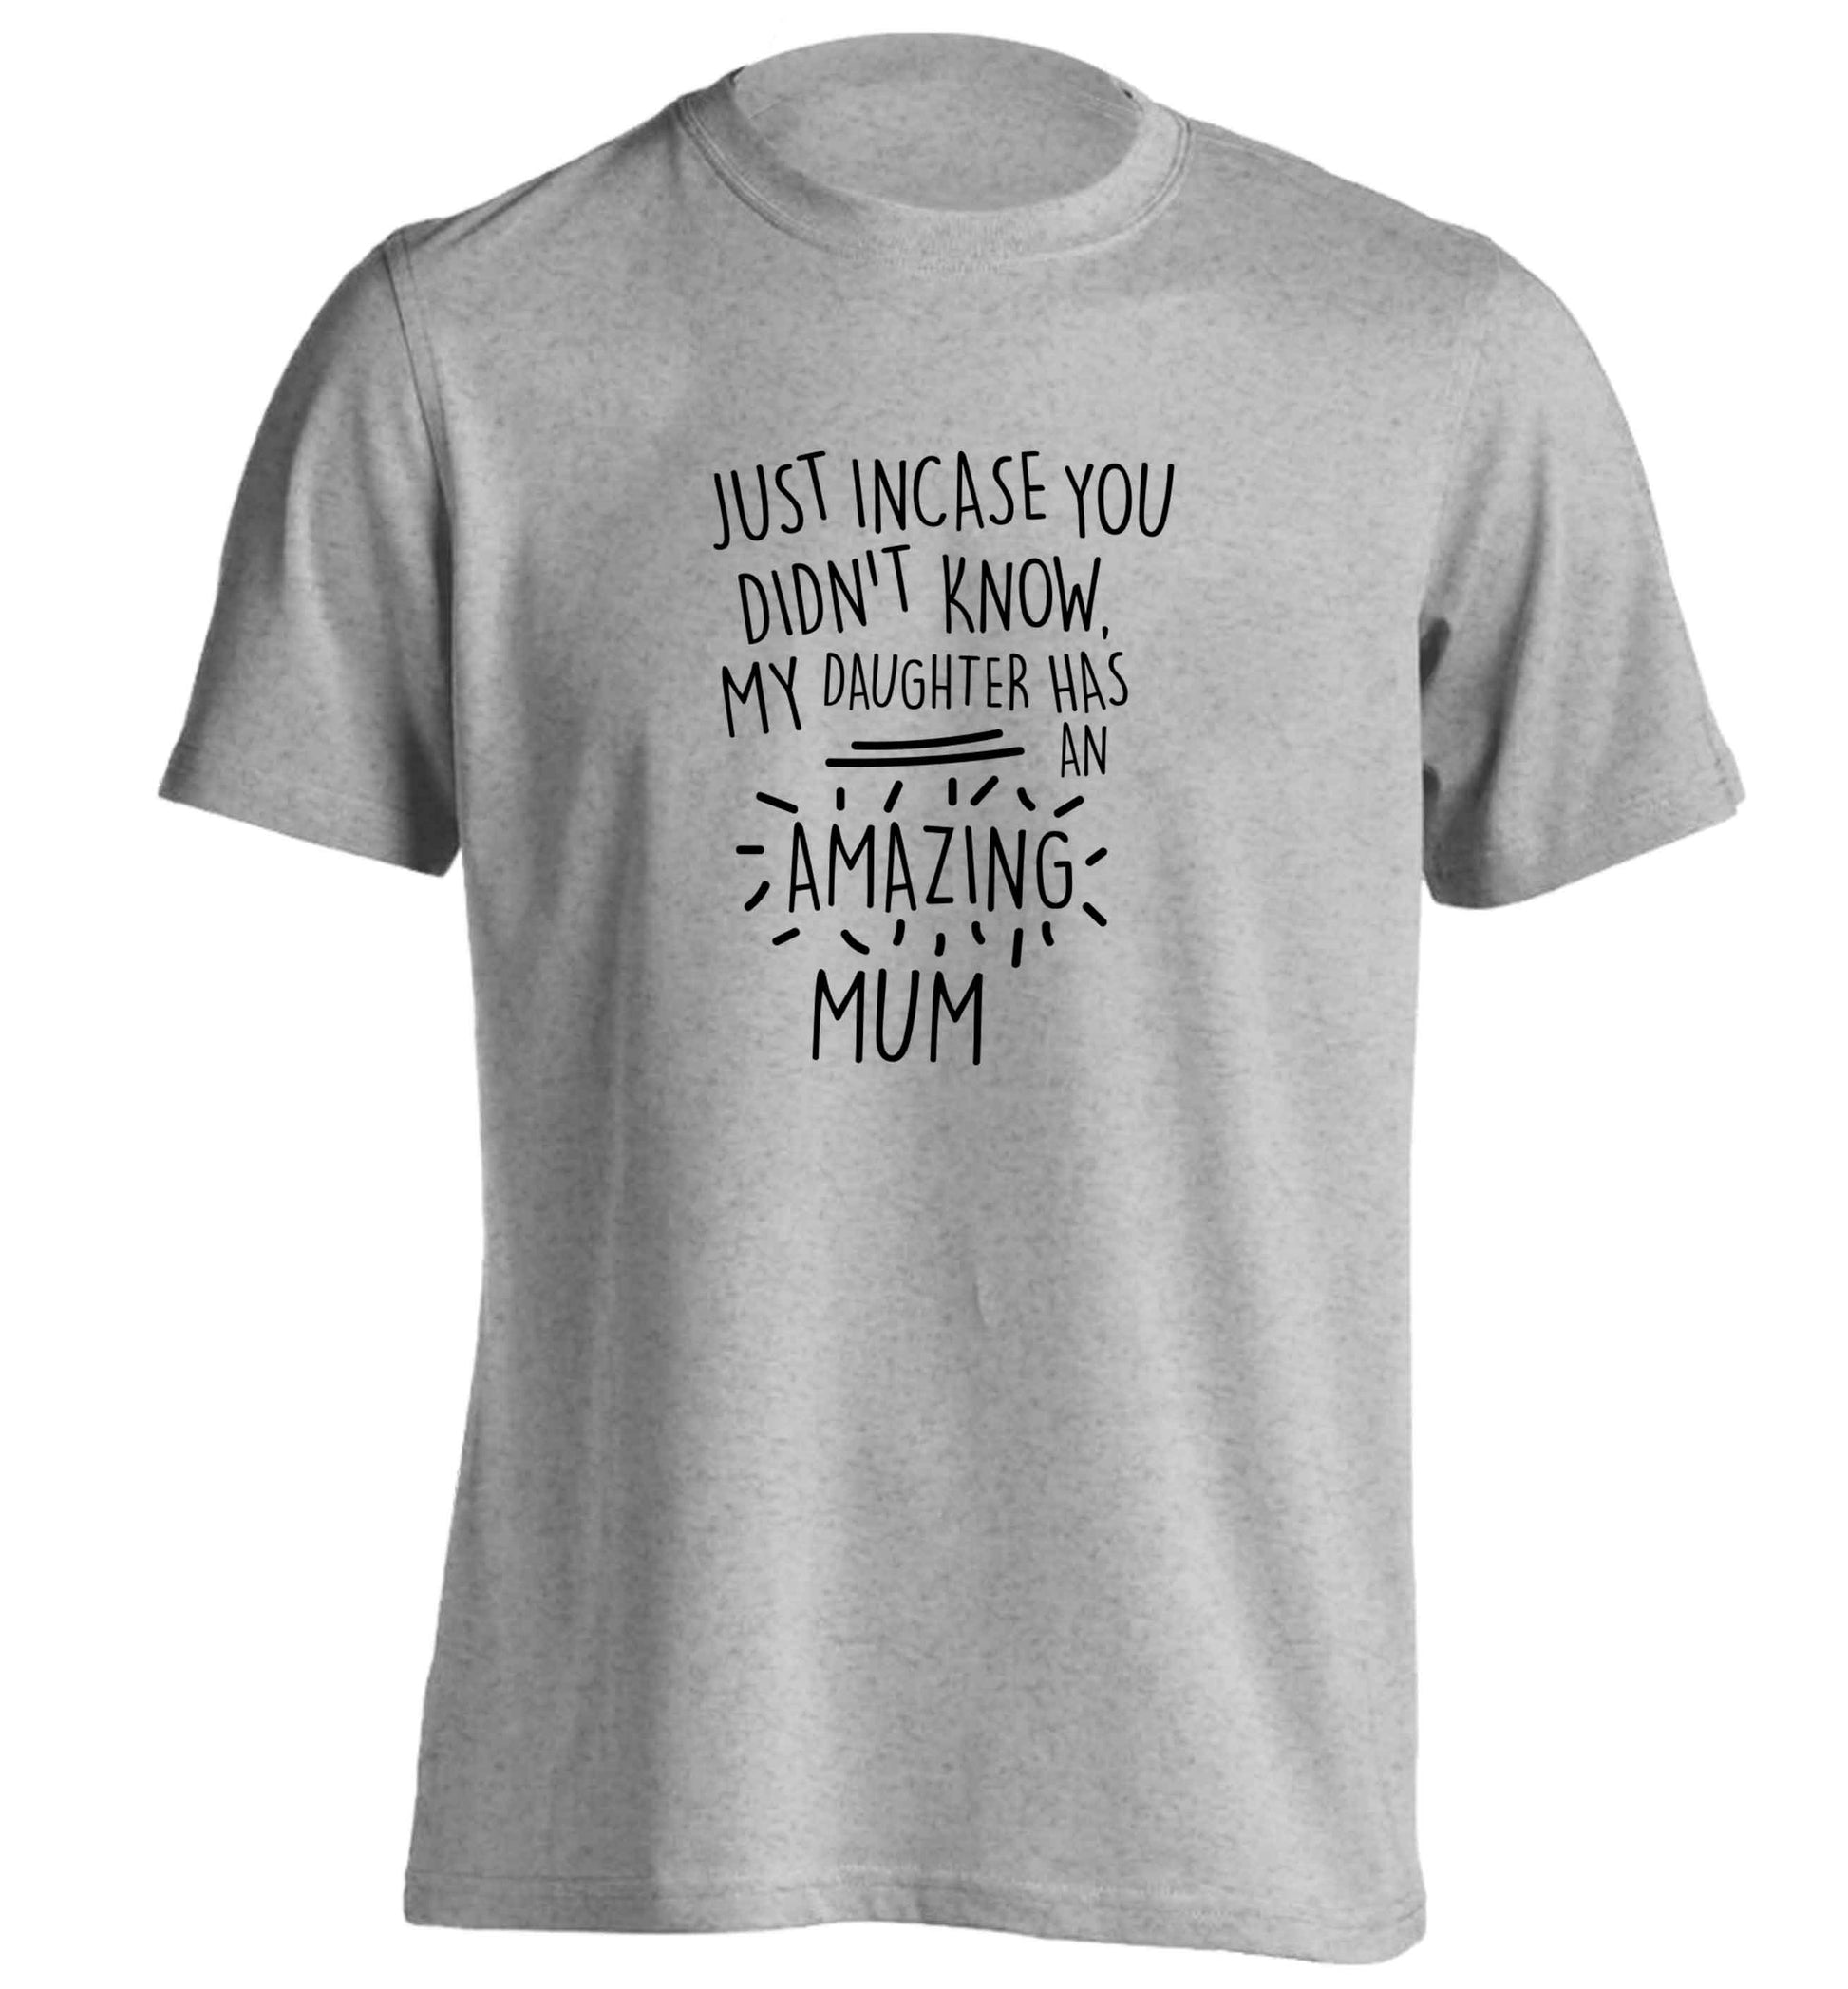 Just incase you didn't know my daughter has an amazing mum adults unisex grey Tshirt 2XL